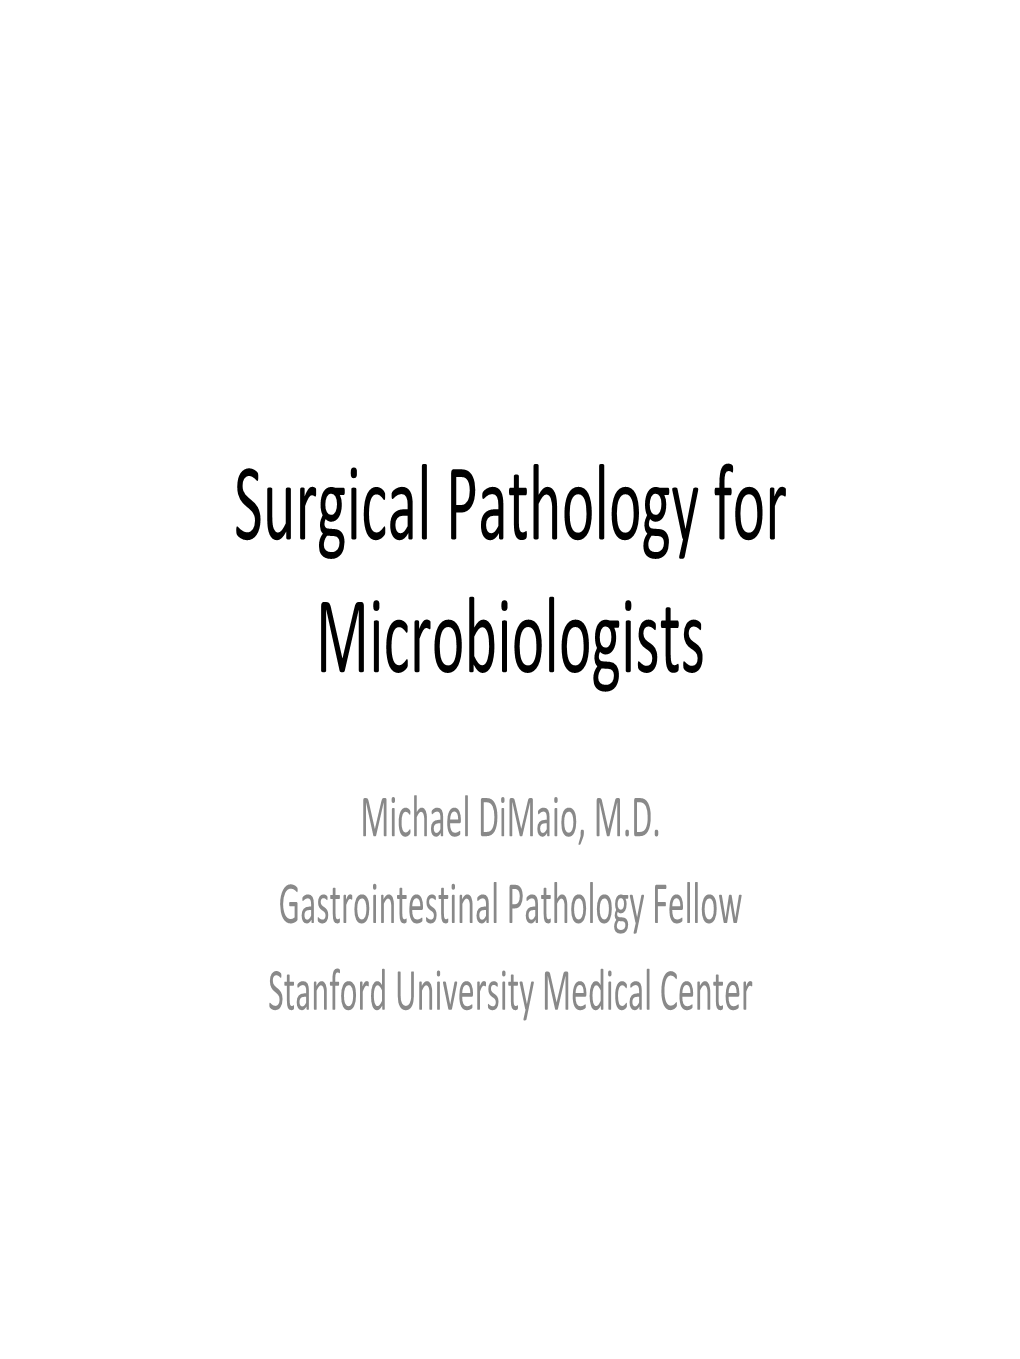 Surgical Pathology for Microbiologists